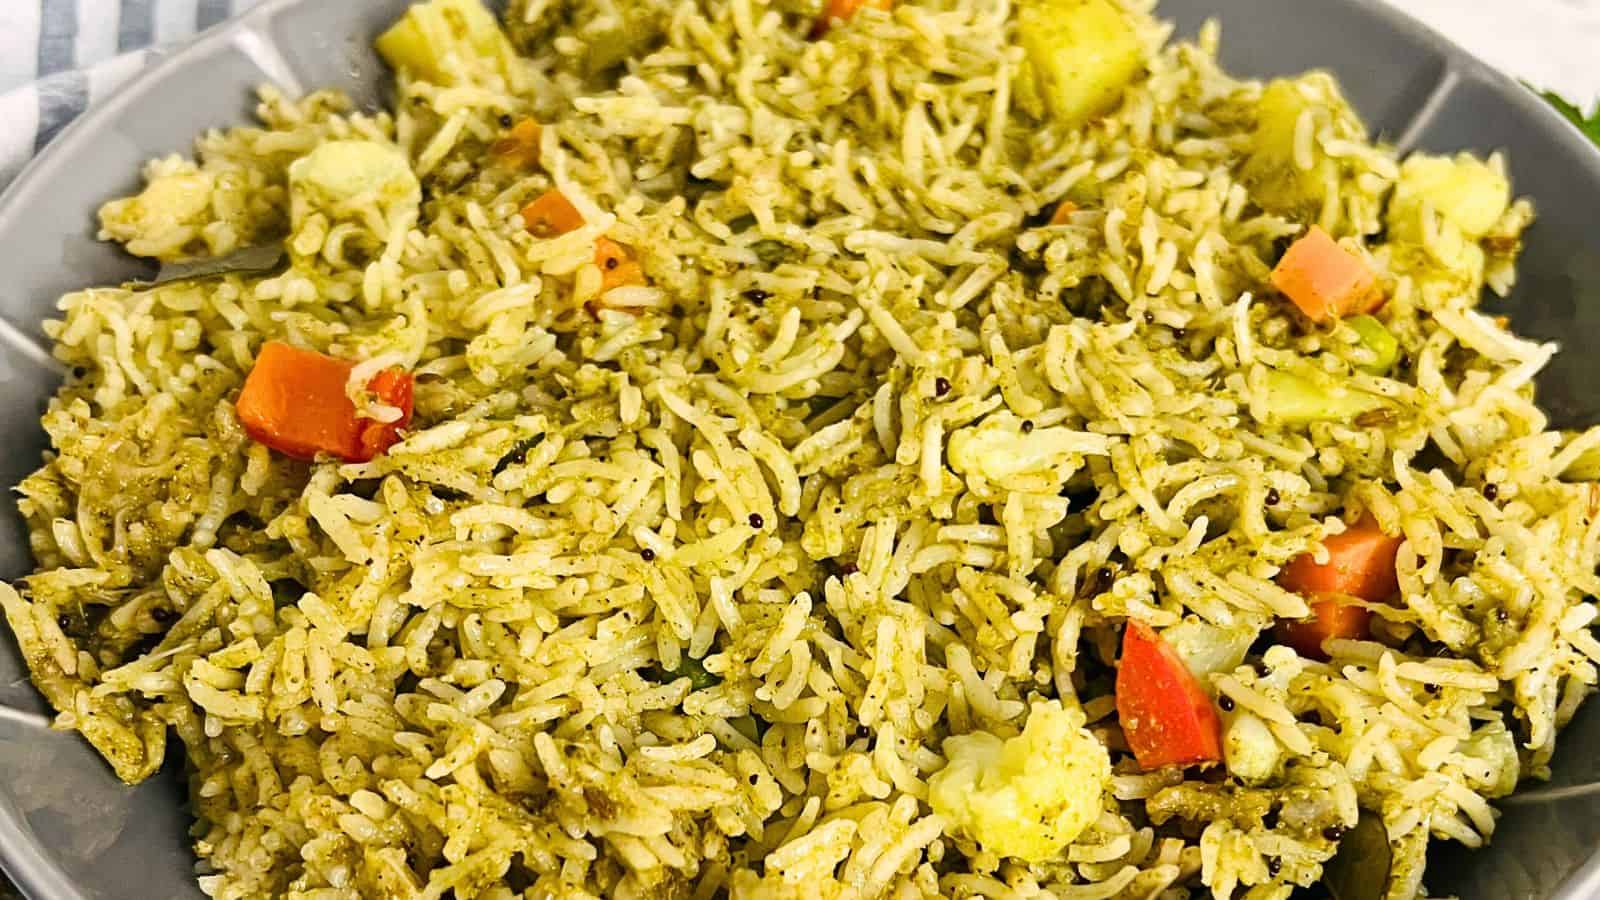 A close-up of a bowl of Vegetable Pulao containing rice mixed with chunks of carrots and cauliflower.